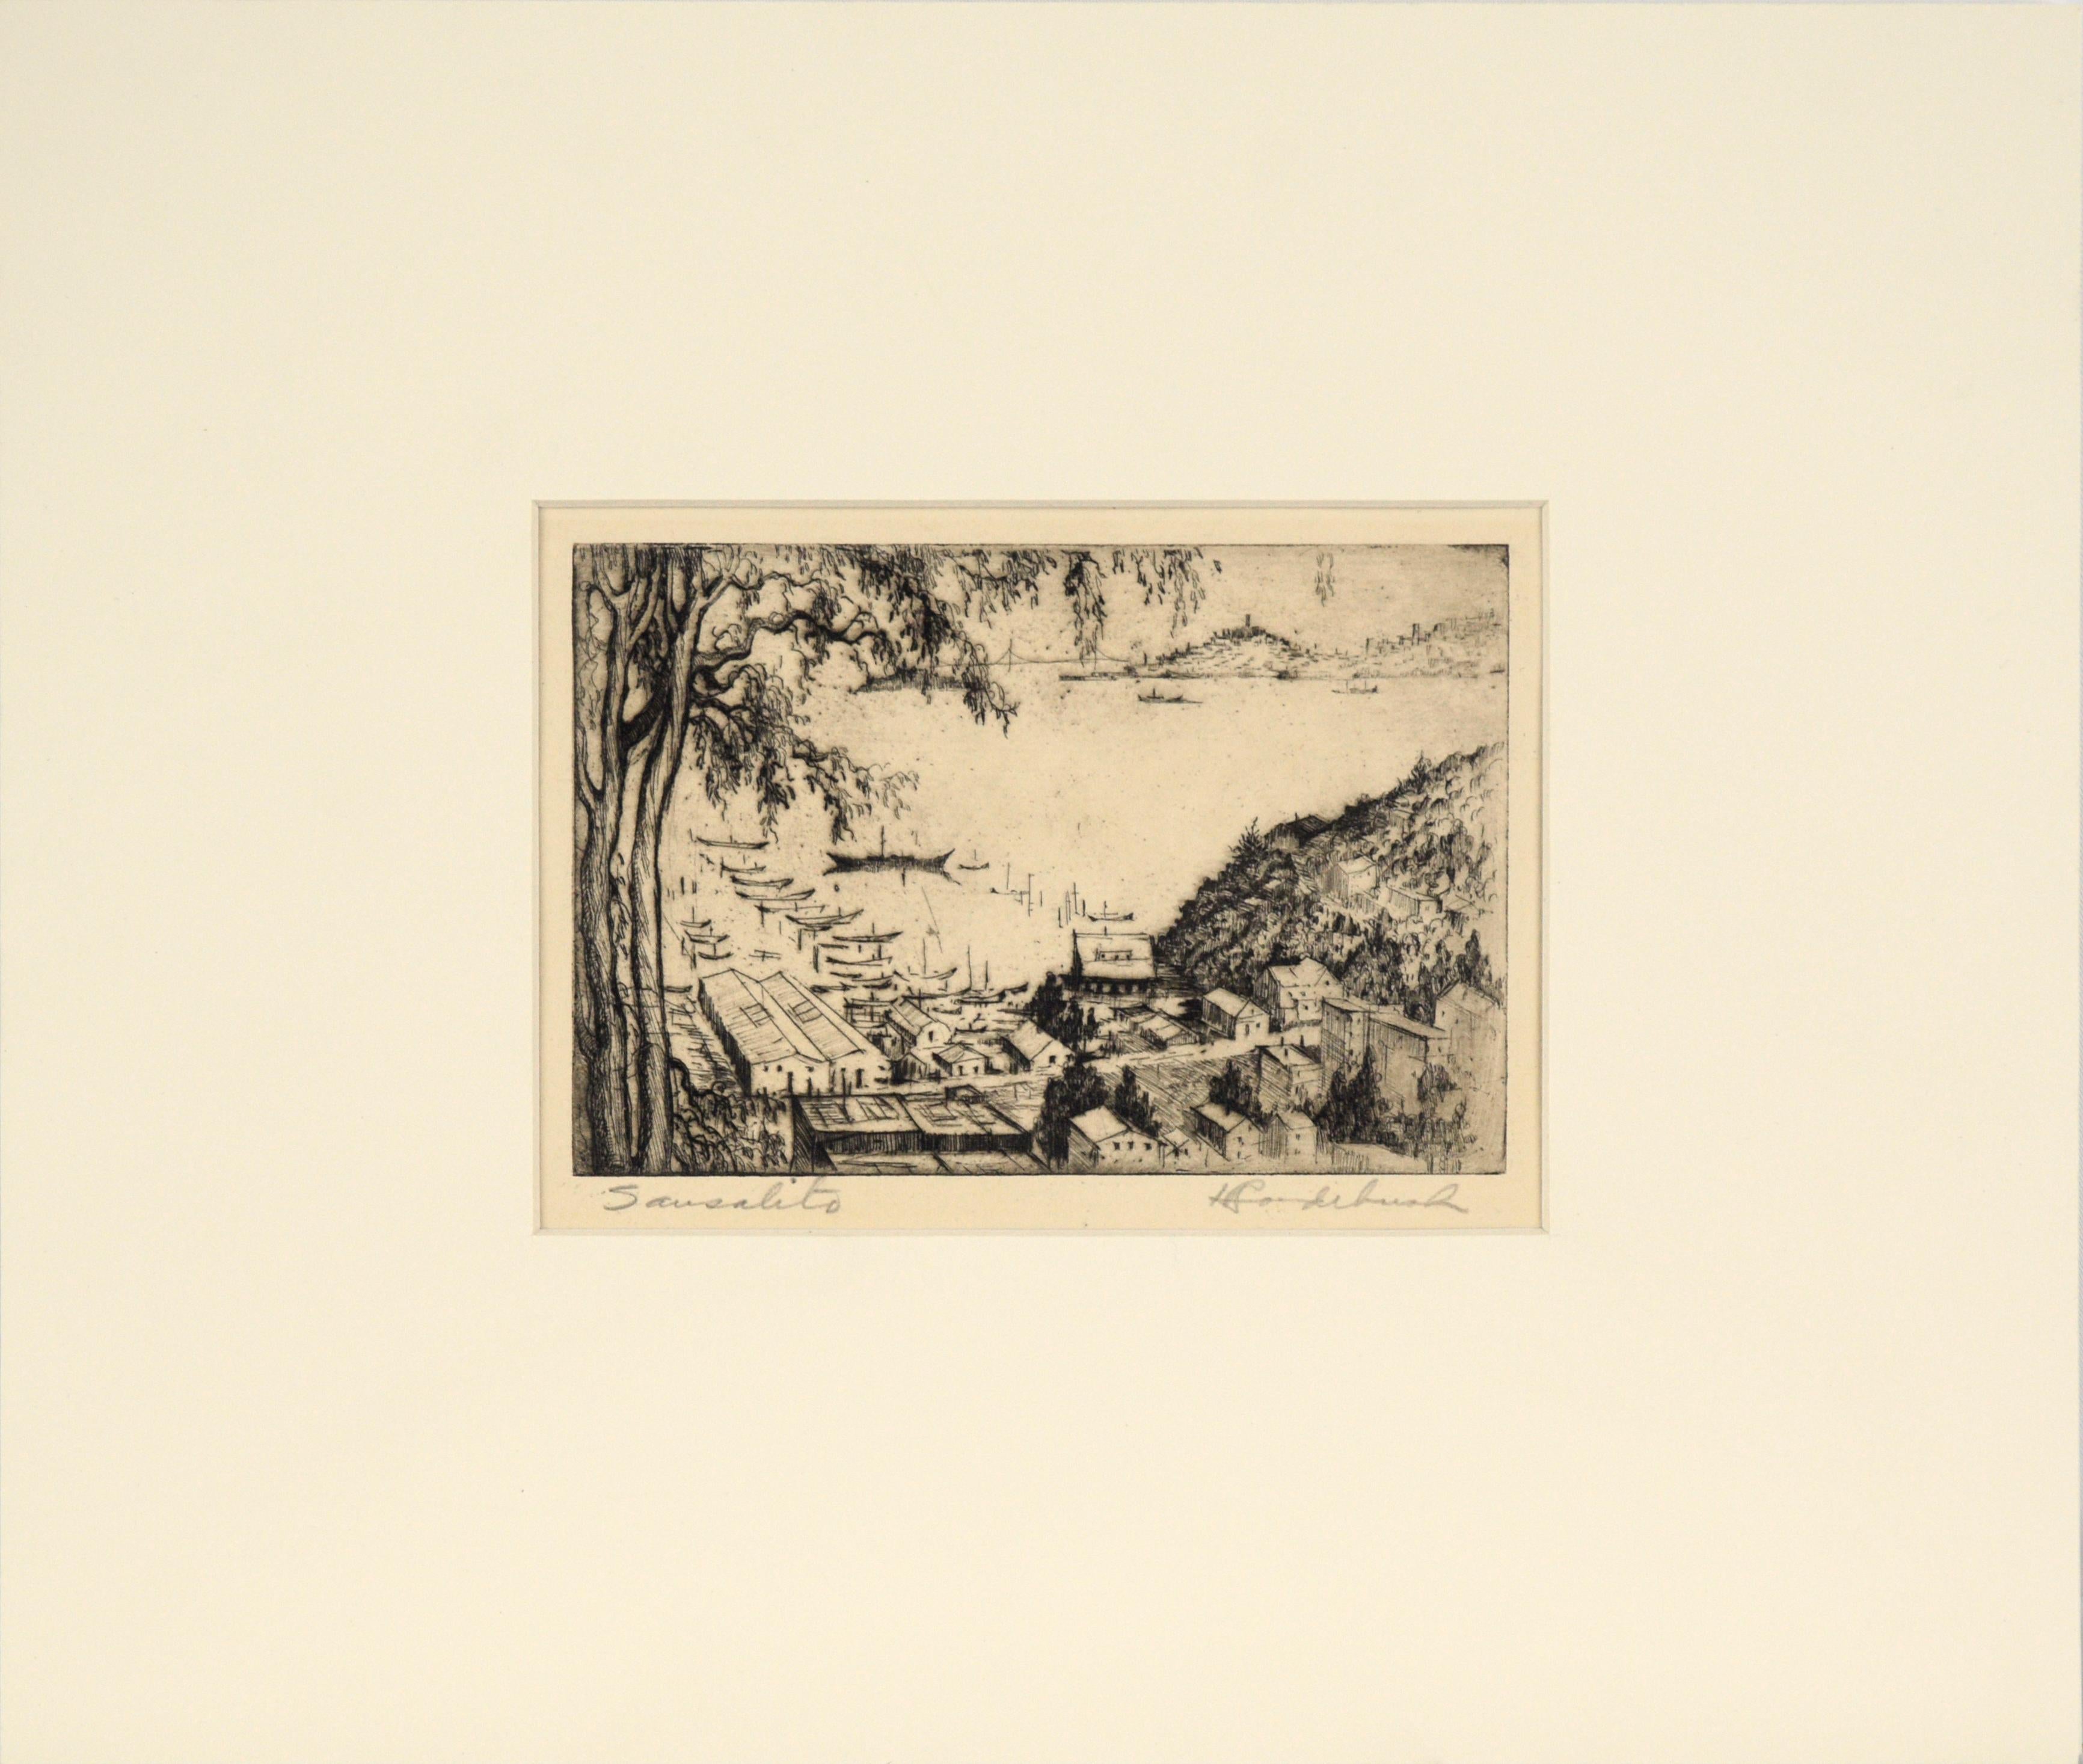 Harriet Roudebush Landscape Print - "Sausalito" Harbor Seascape Drypoint Etching on Paper